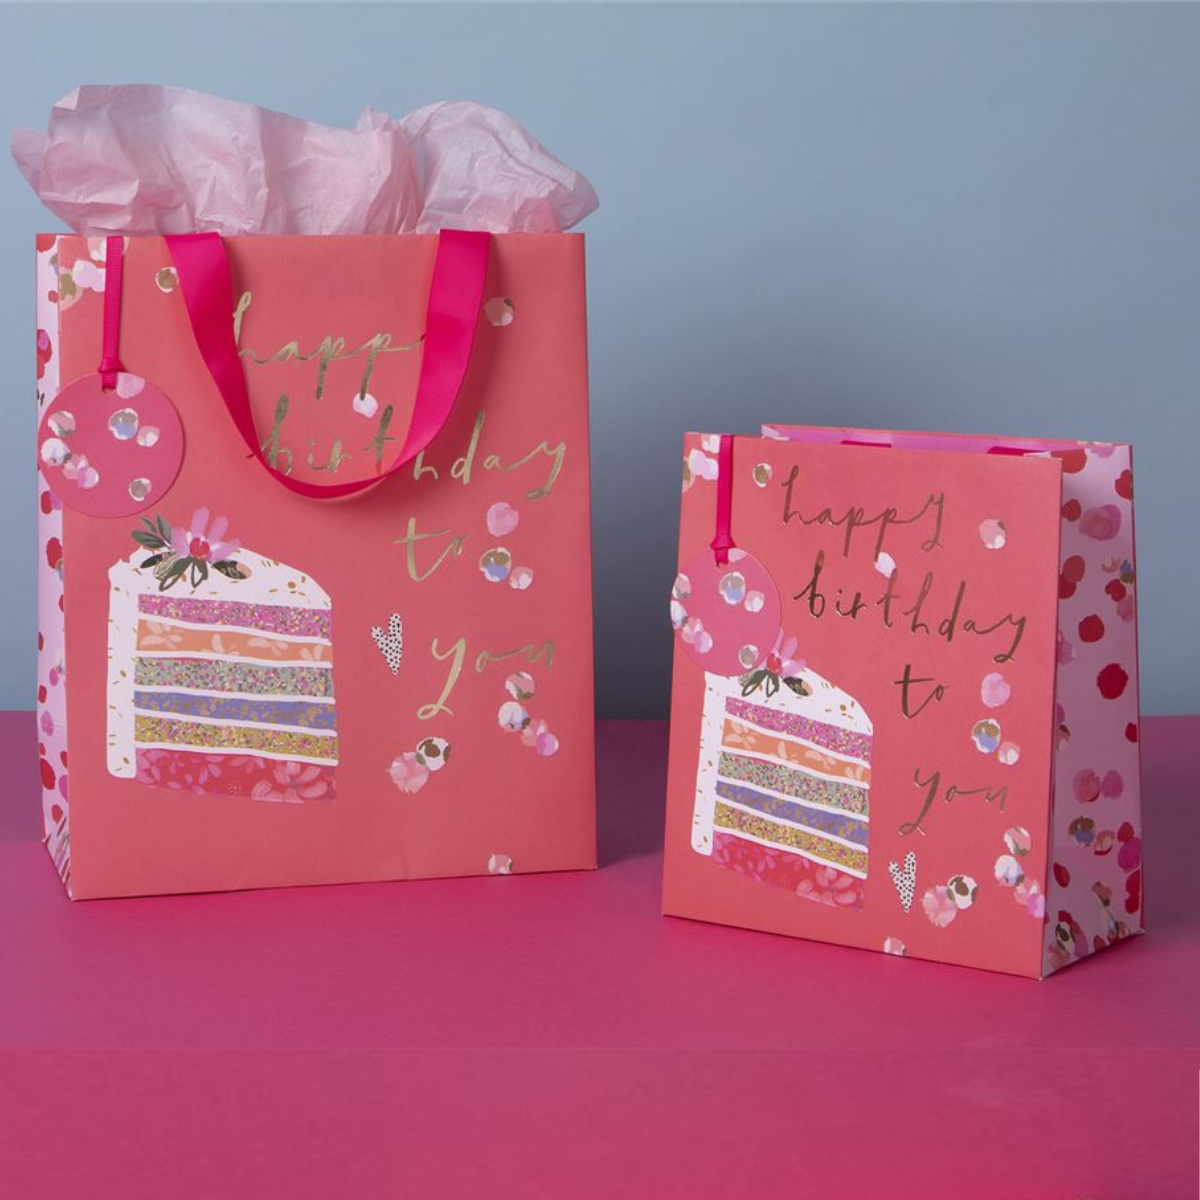 Lifestyle image with matching medium bag and tissue paper